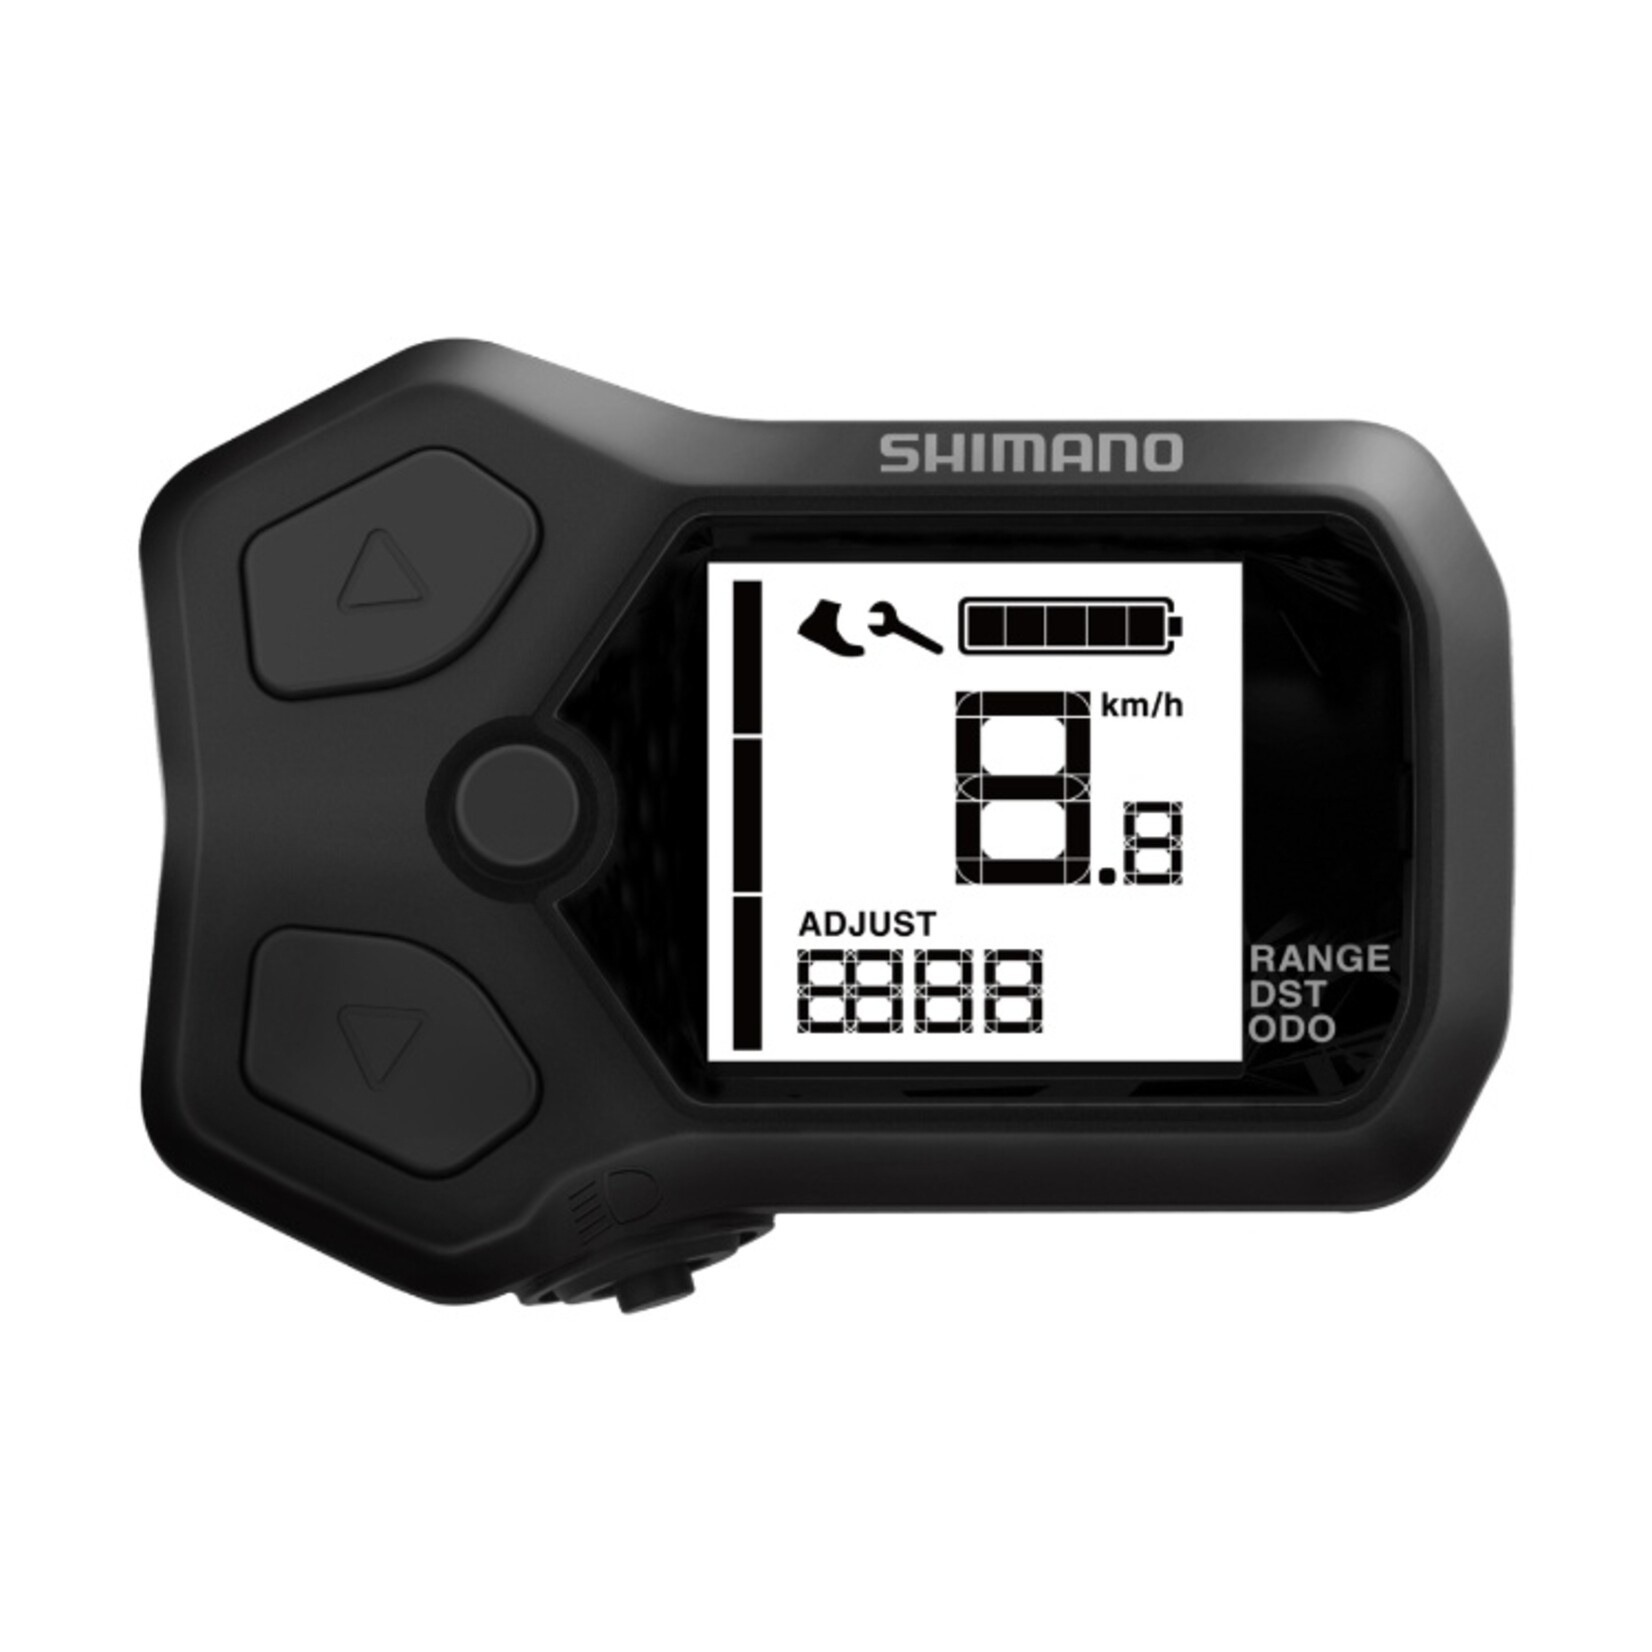 SHIMANO SC-E5000M DISPLAY WITH WALK ASSIST